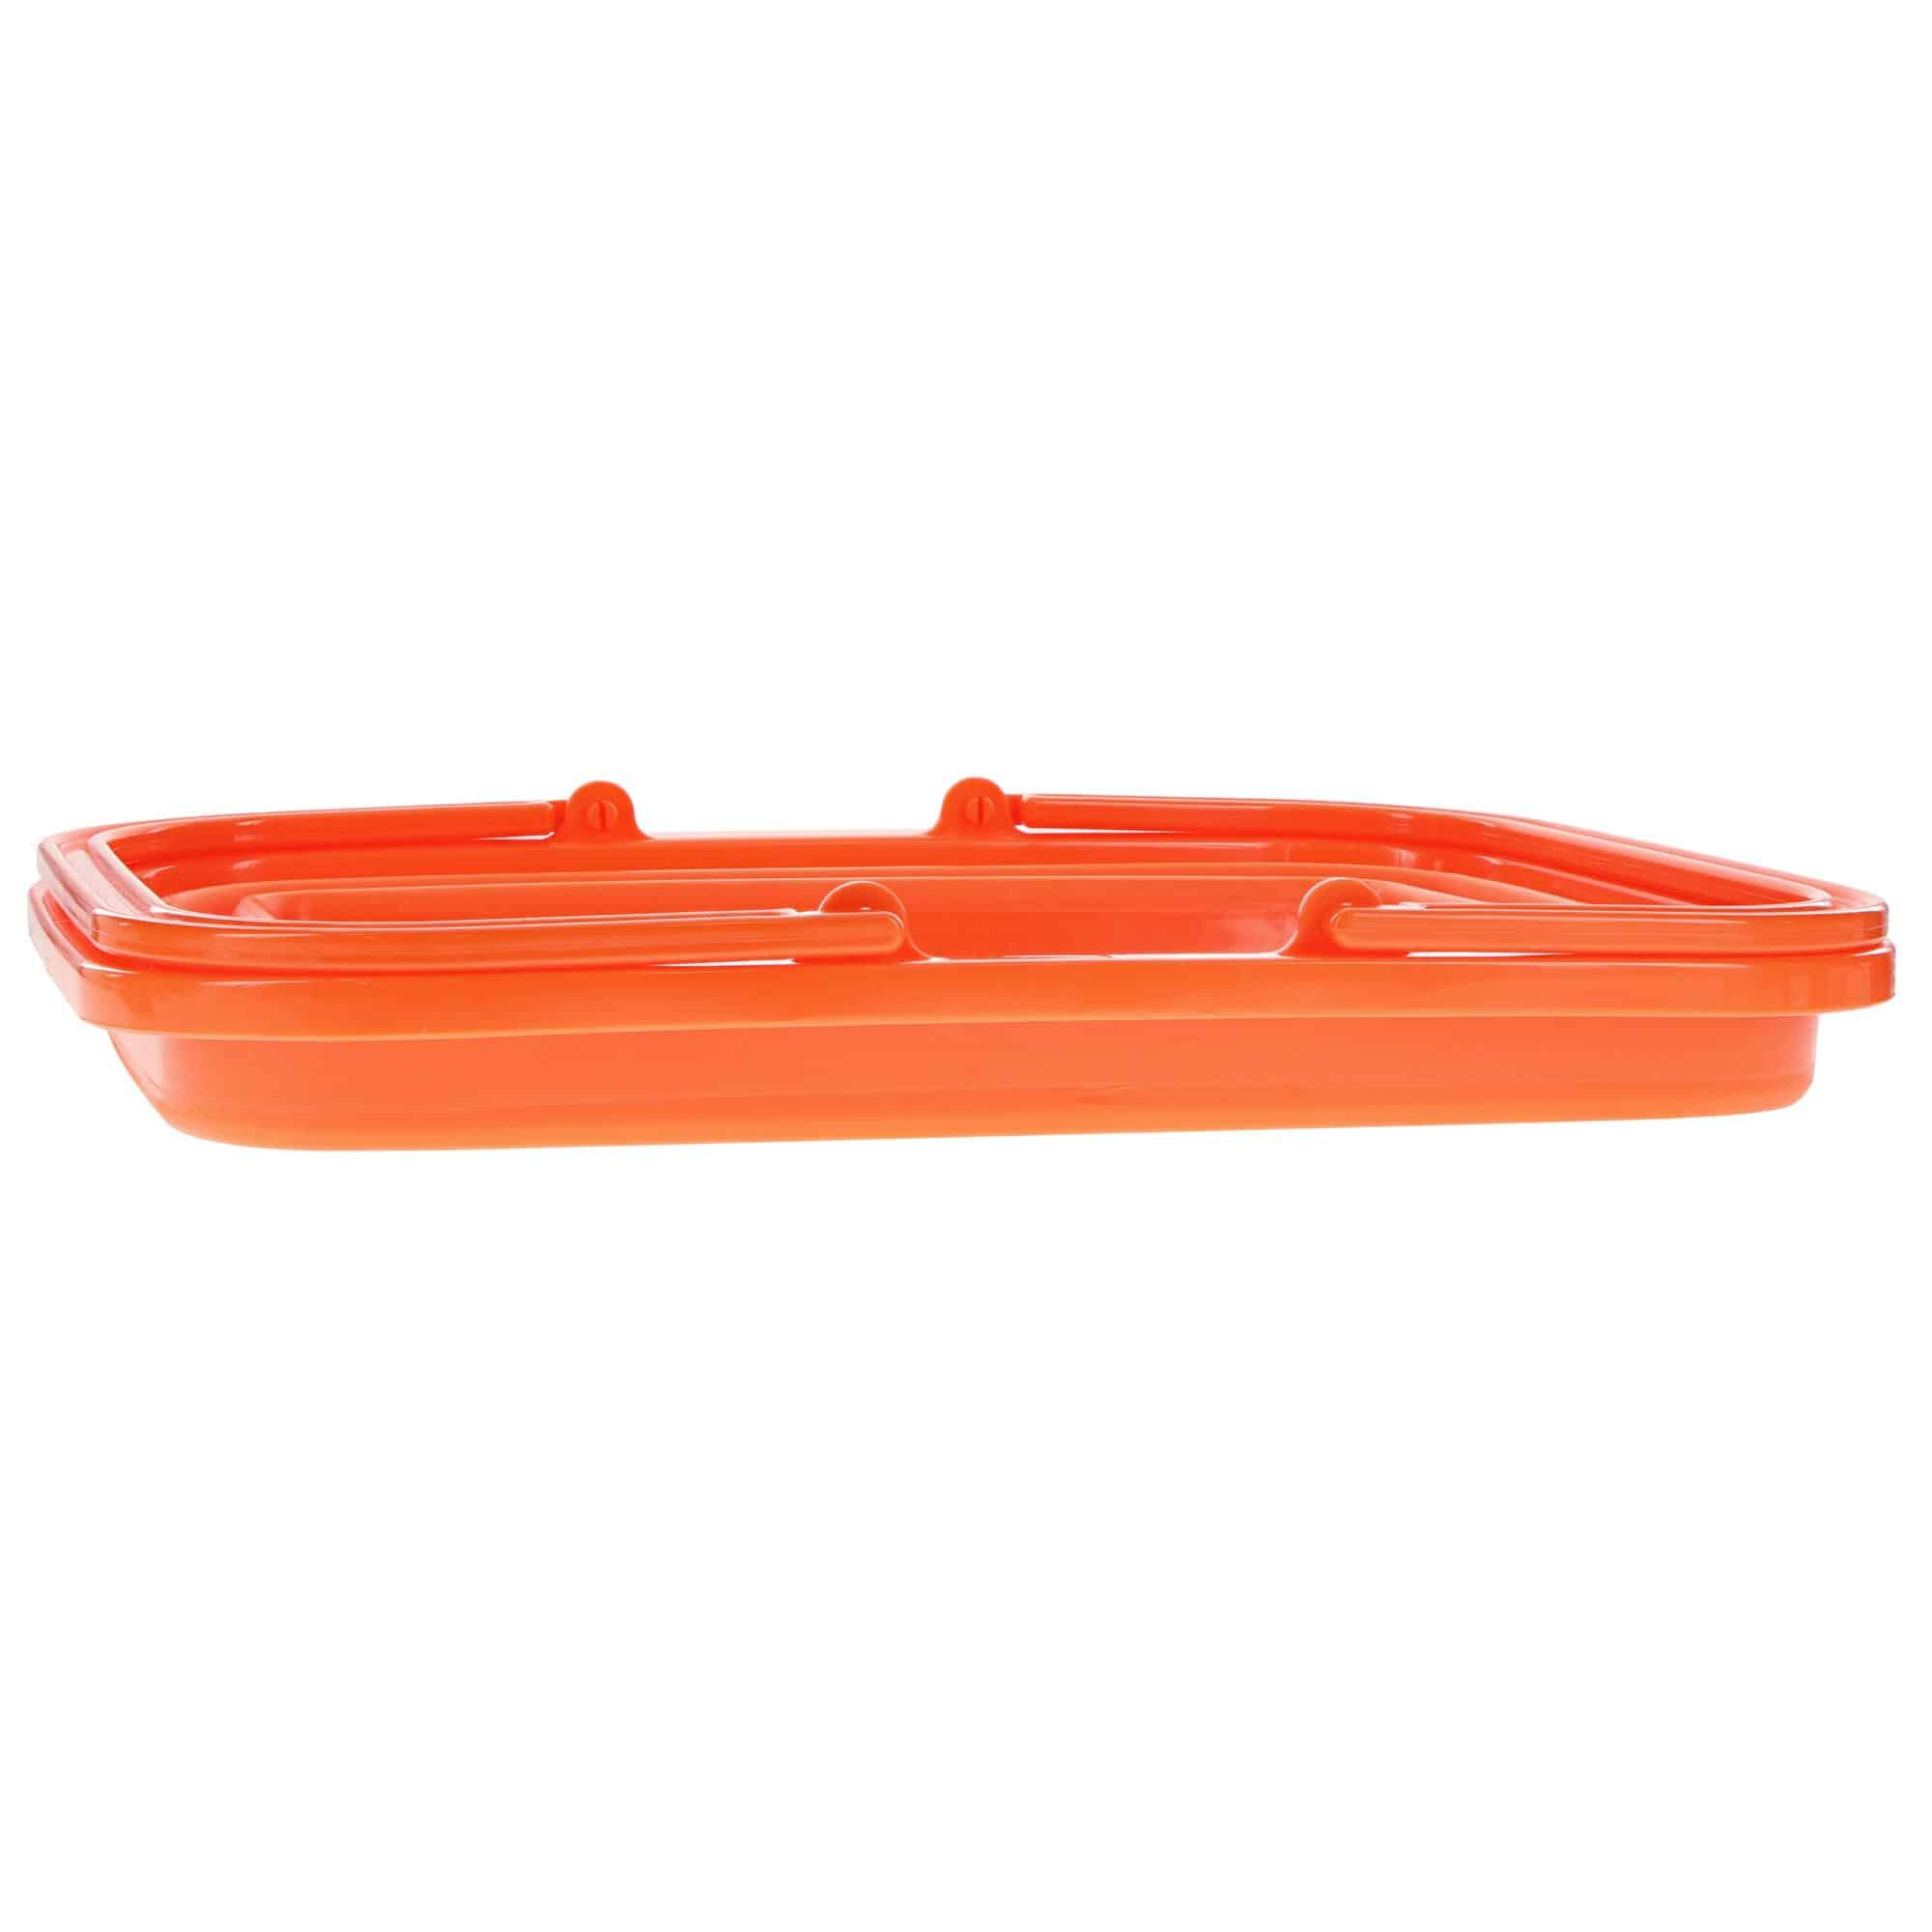 Details about   UST FLEXWARE TUB ORANGE COLOR CAPACITY 9.7 GAL BRAND NEW. 